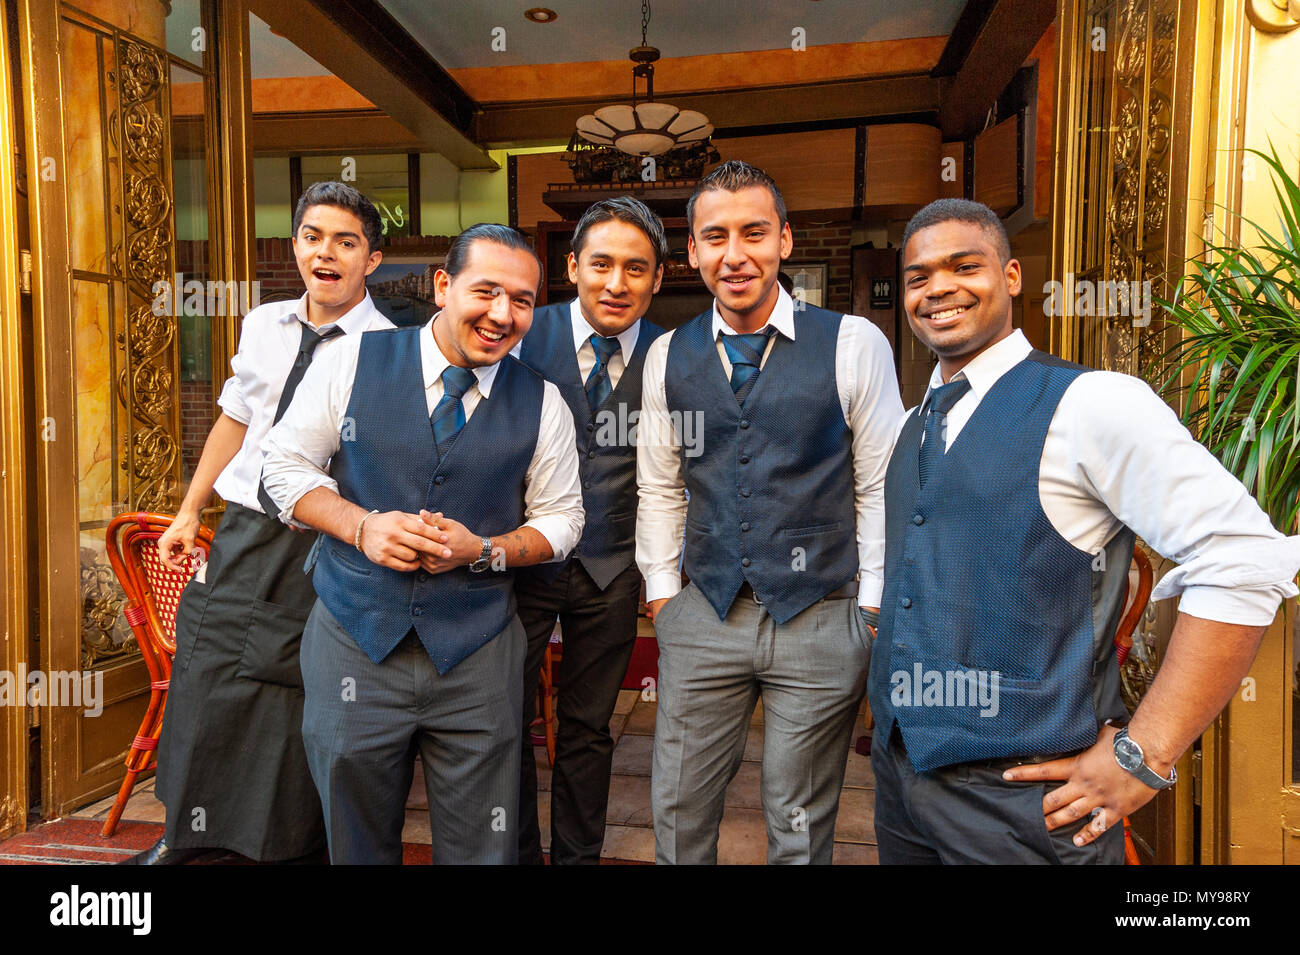 Group of Hispanic waiters posing for a photo outside restaurant on Mulberry Street in Little Italy, New York City, USA Stock Photo